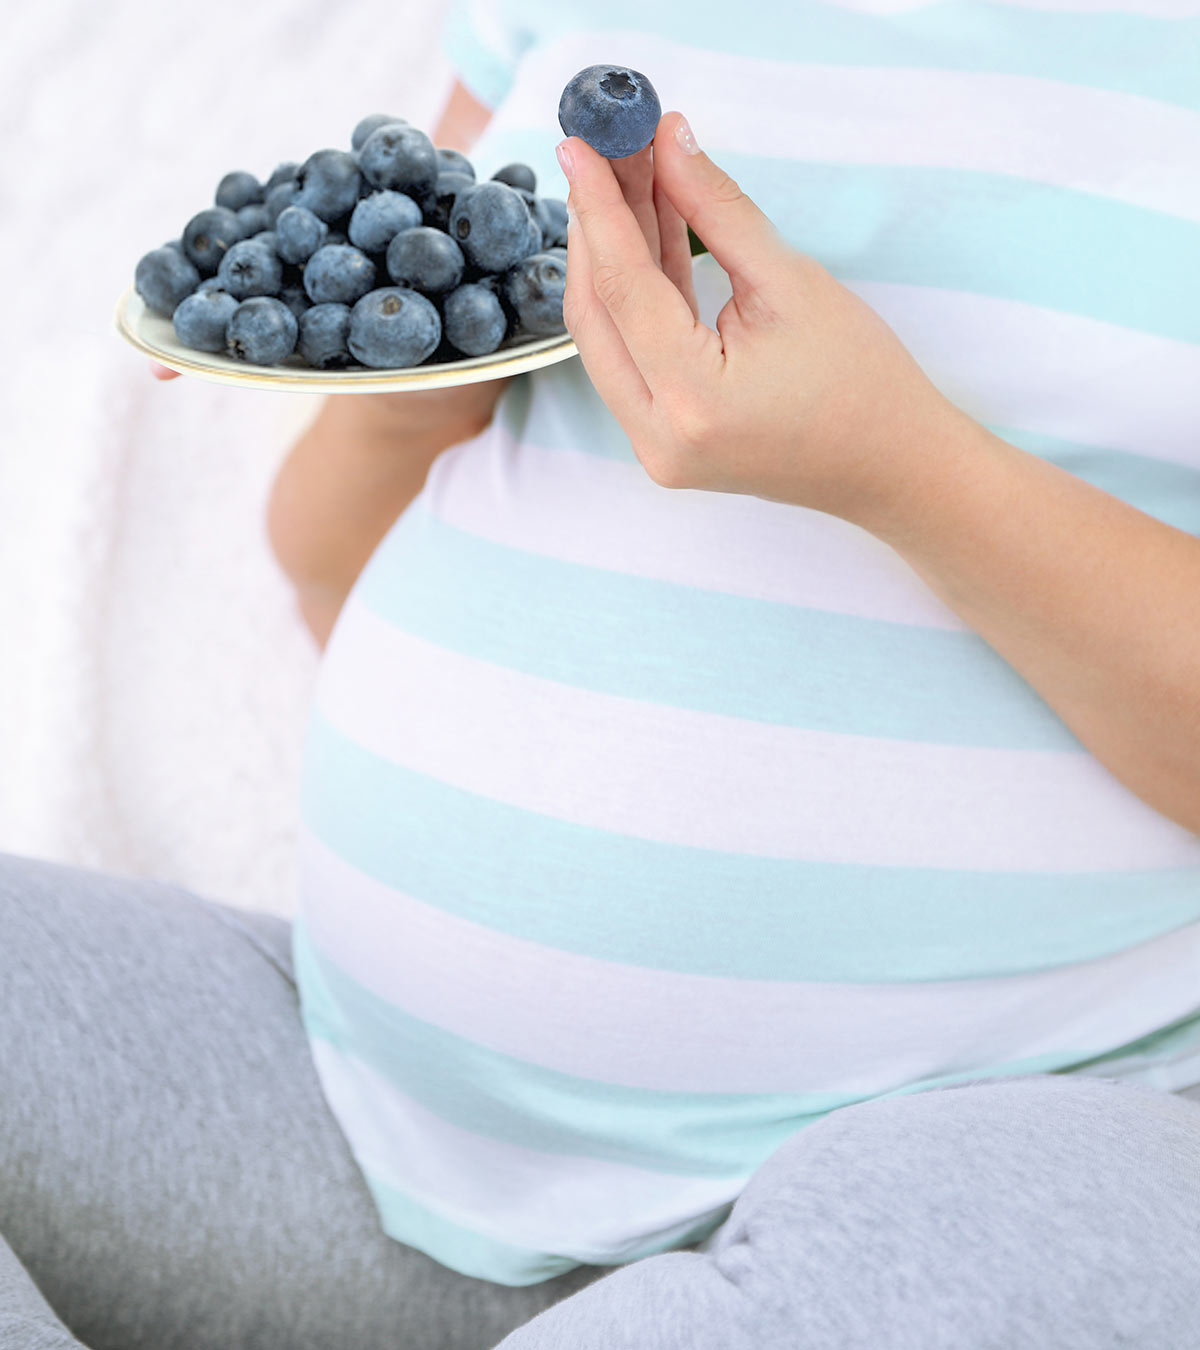 Pregnant Woman Eating Blueberries